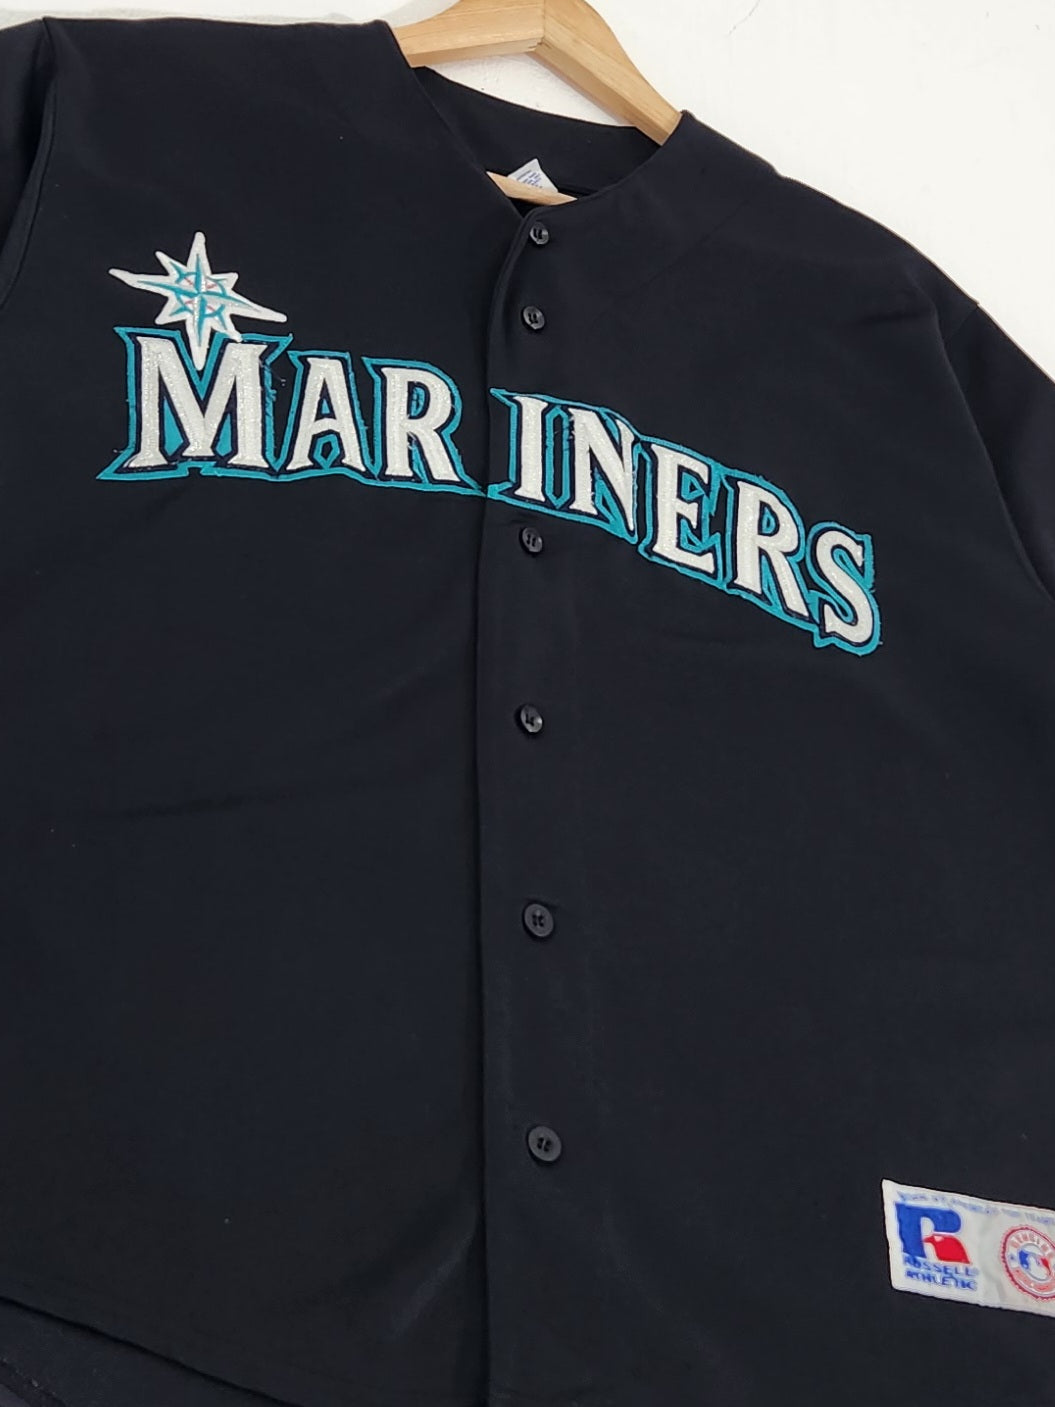 where to buy mariners jersey